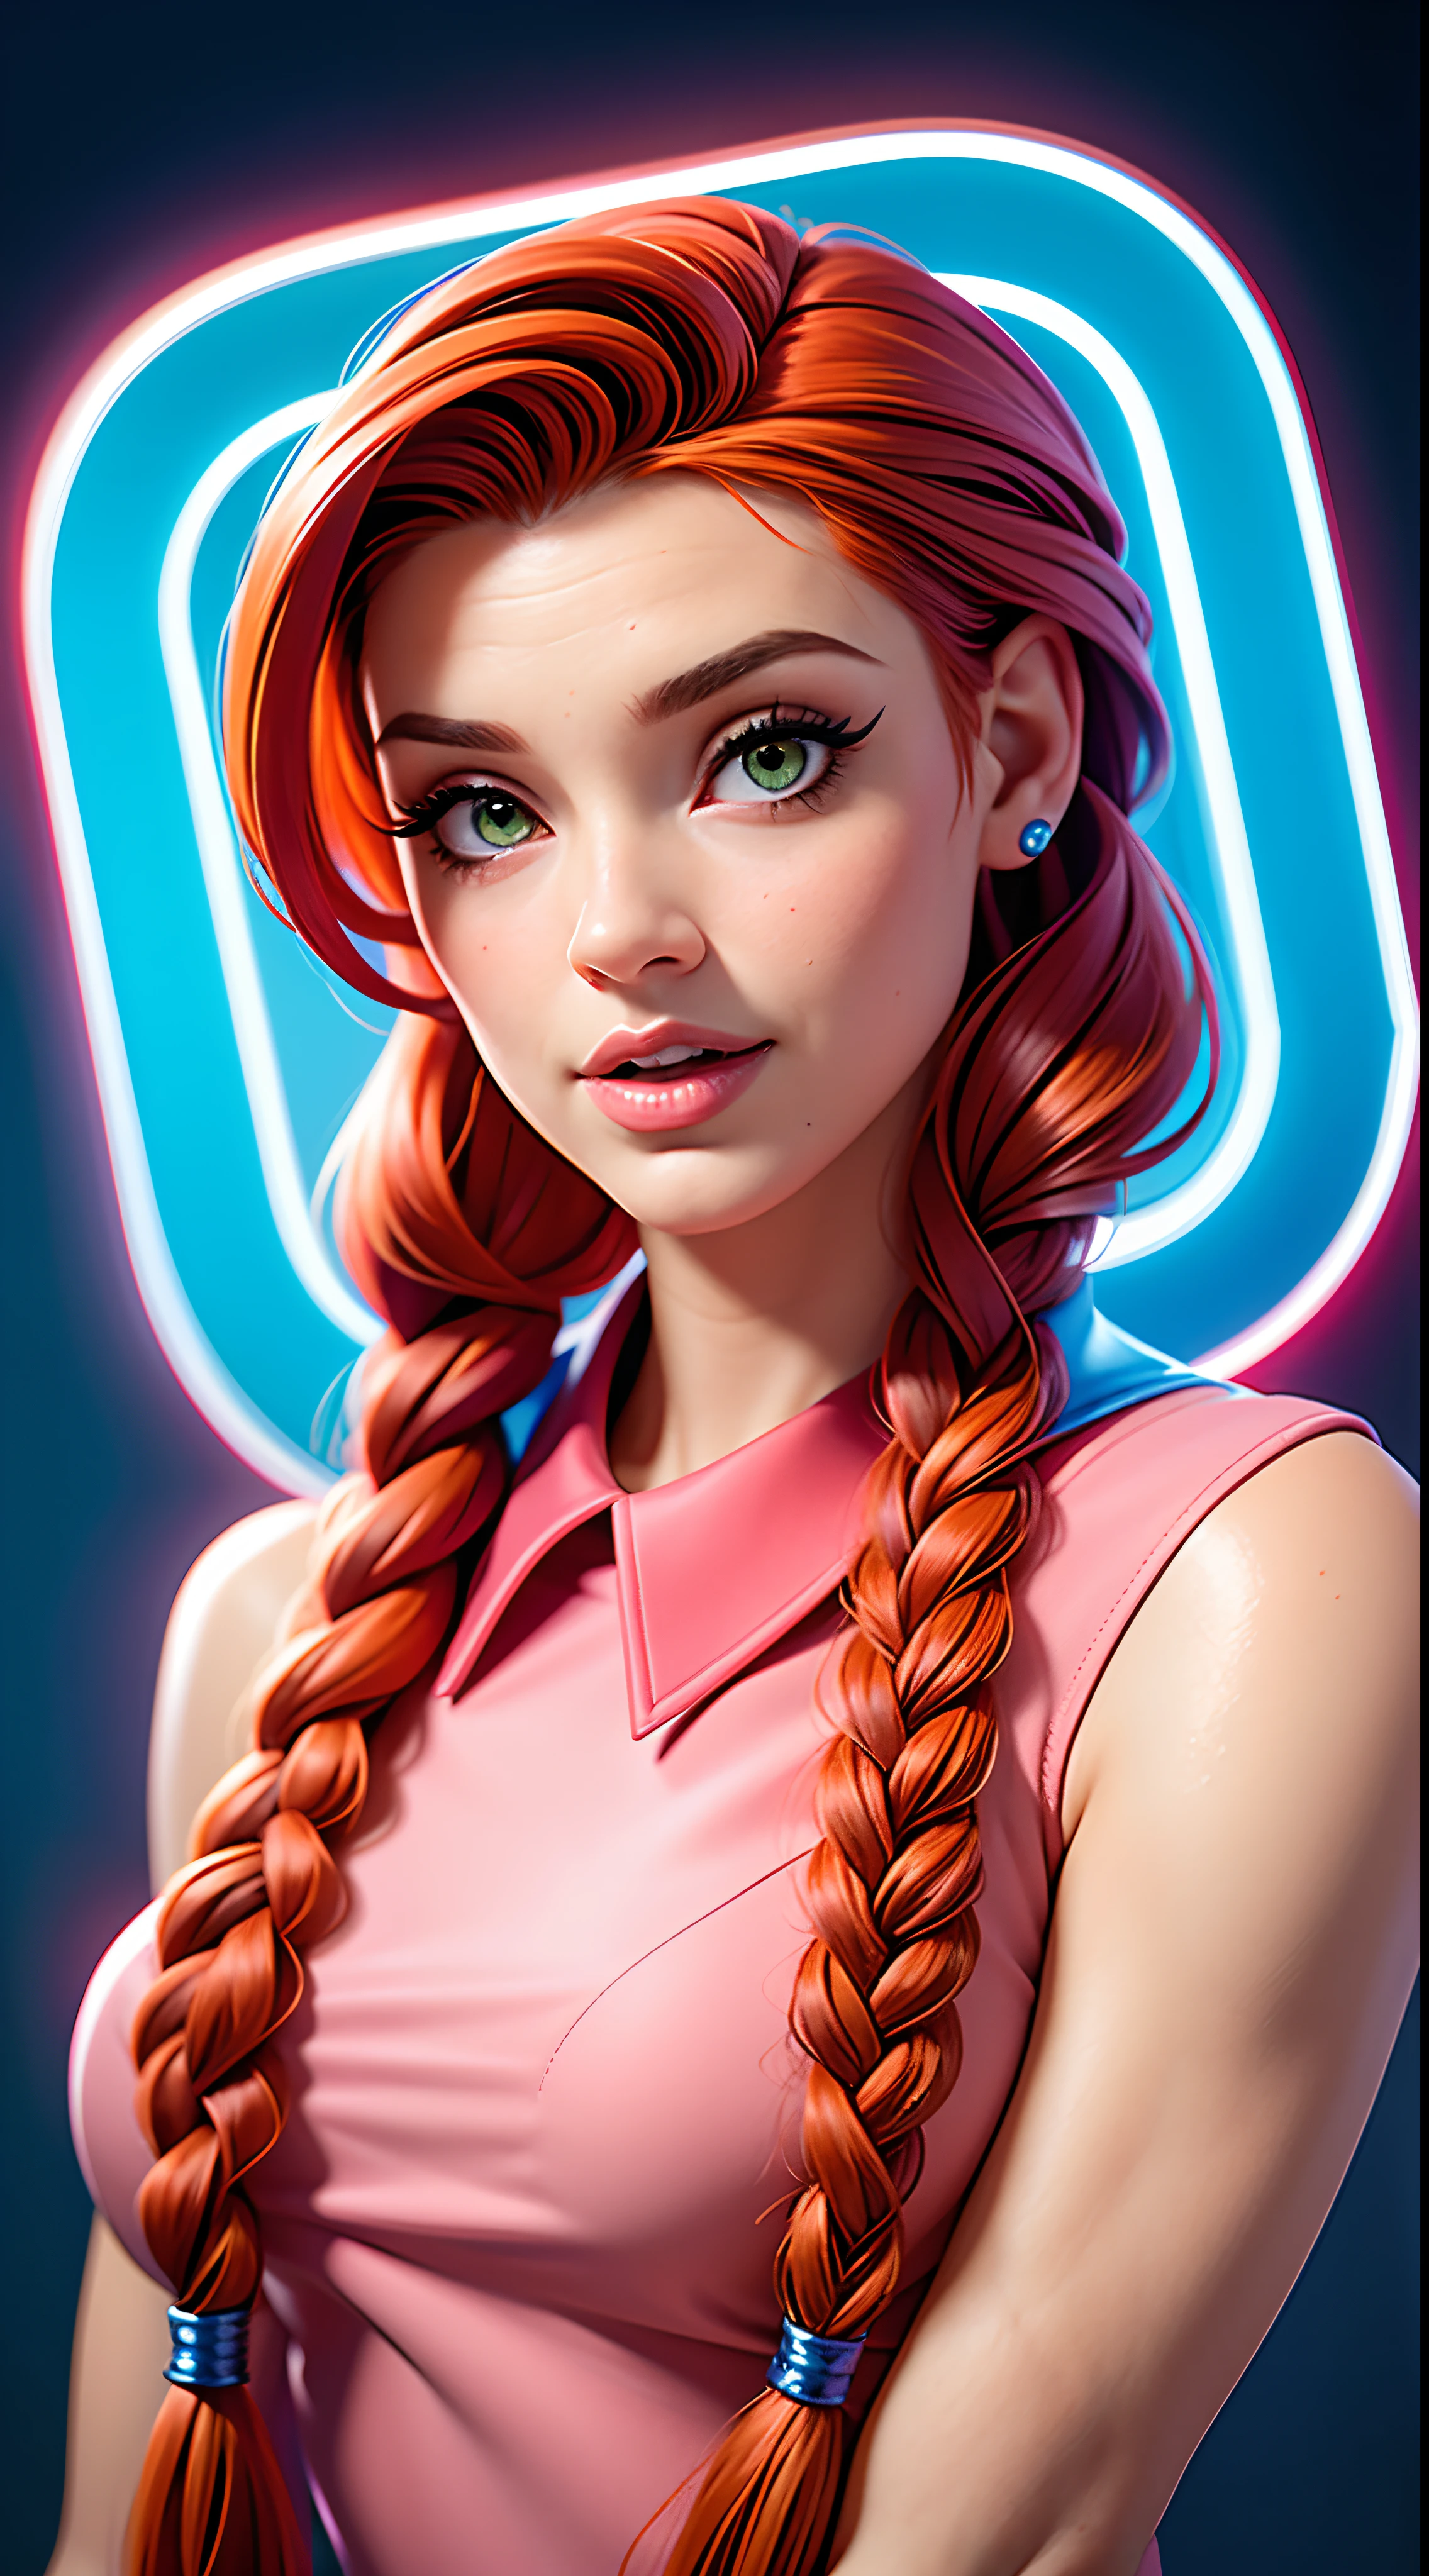 arafed woman with red hair and a purple neon light, hyperrealistic schoolgirl, uma hyperrealistic schoolgirl, red braided hair, Complex red braided hair, she has red hair, red glowing hair, plaits, red hair girl, Hairstyle Braids, inspired by Daphne Fedarb,  red haired, red head, pigtail, sadie sink